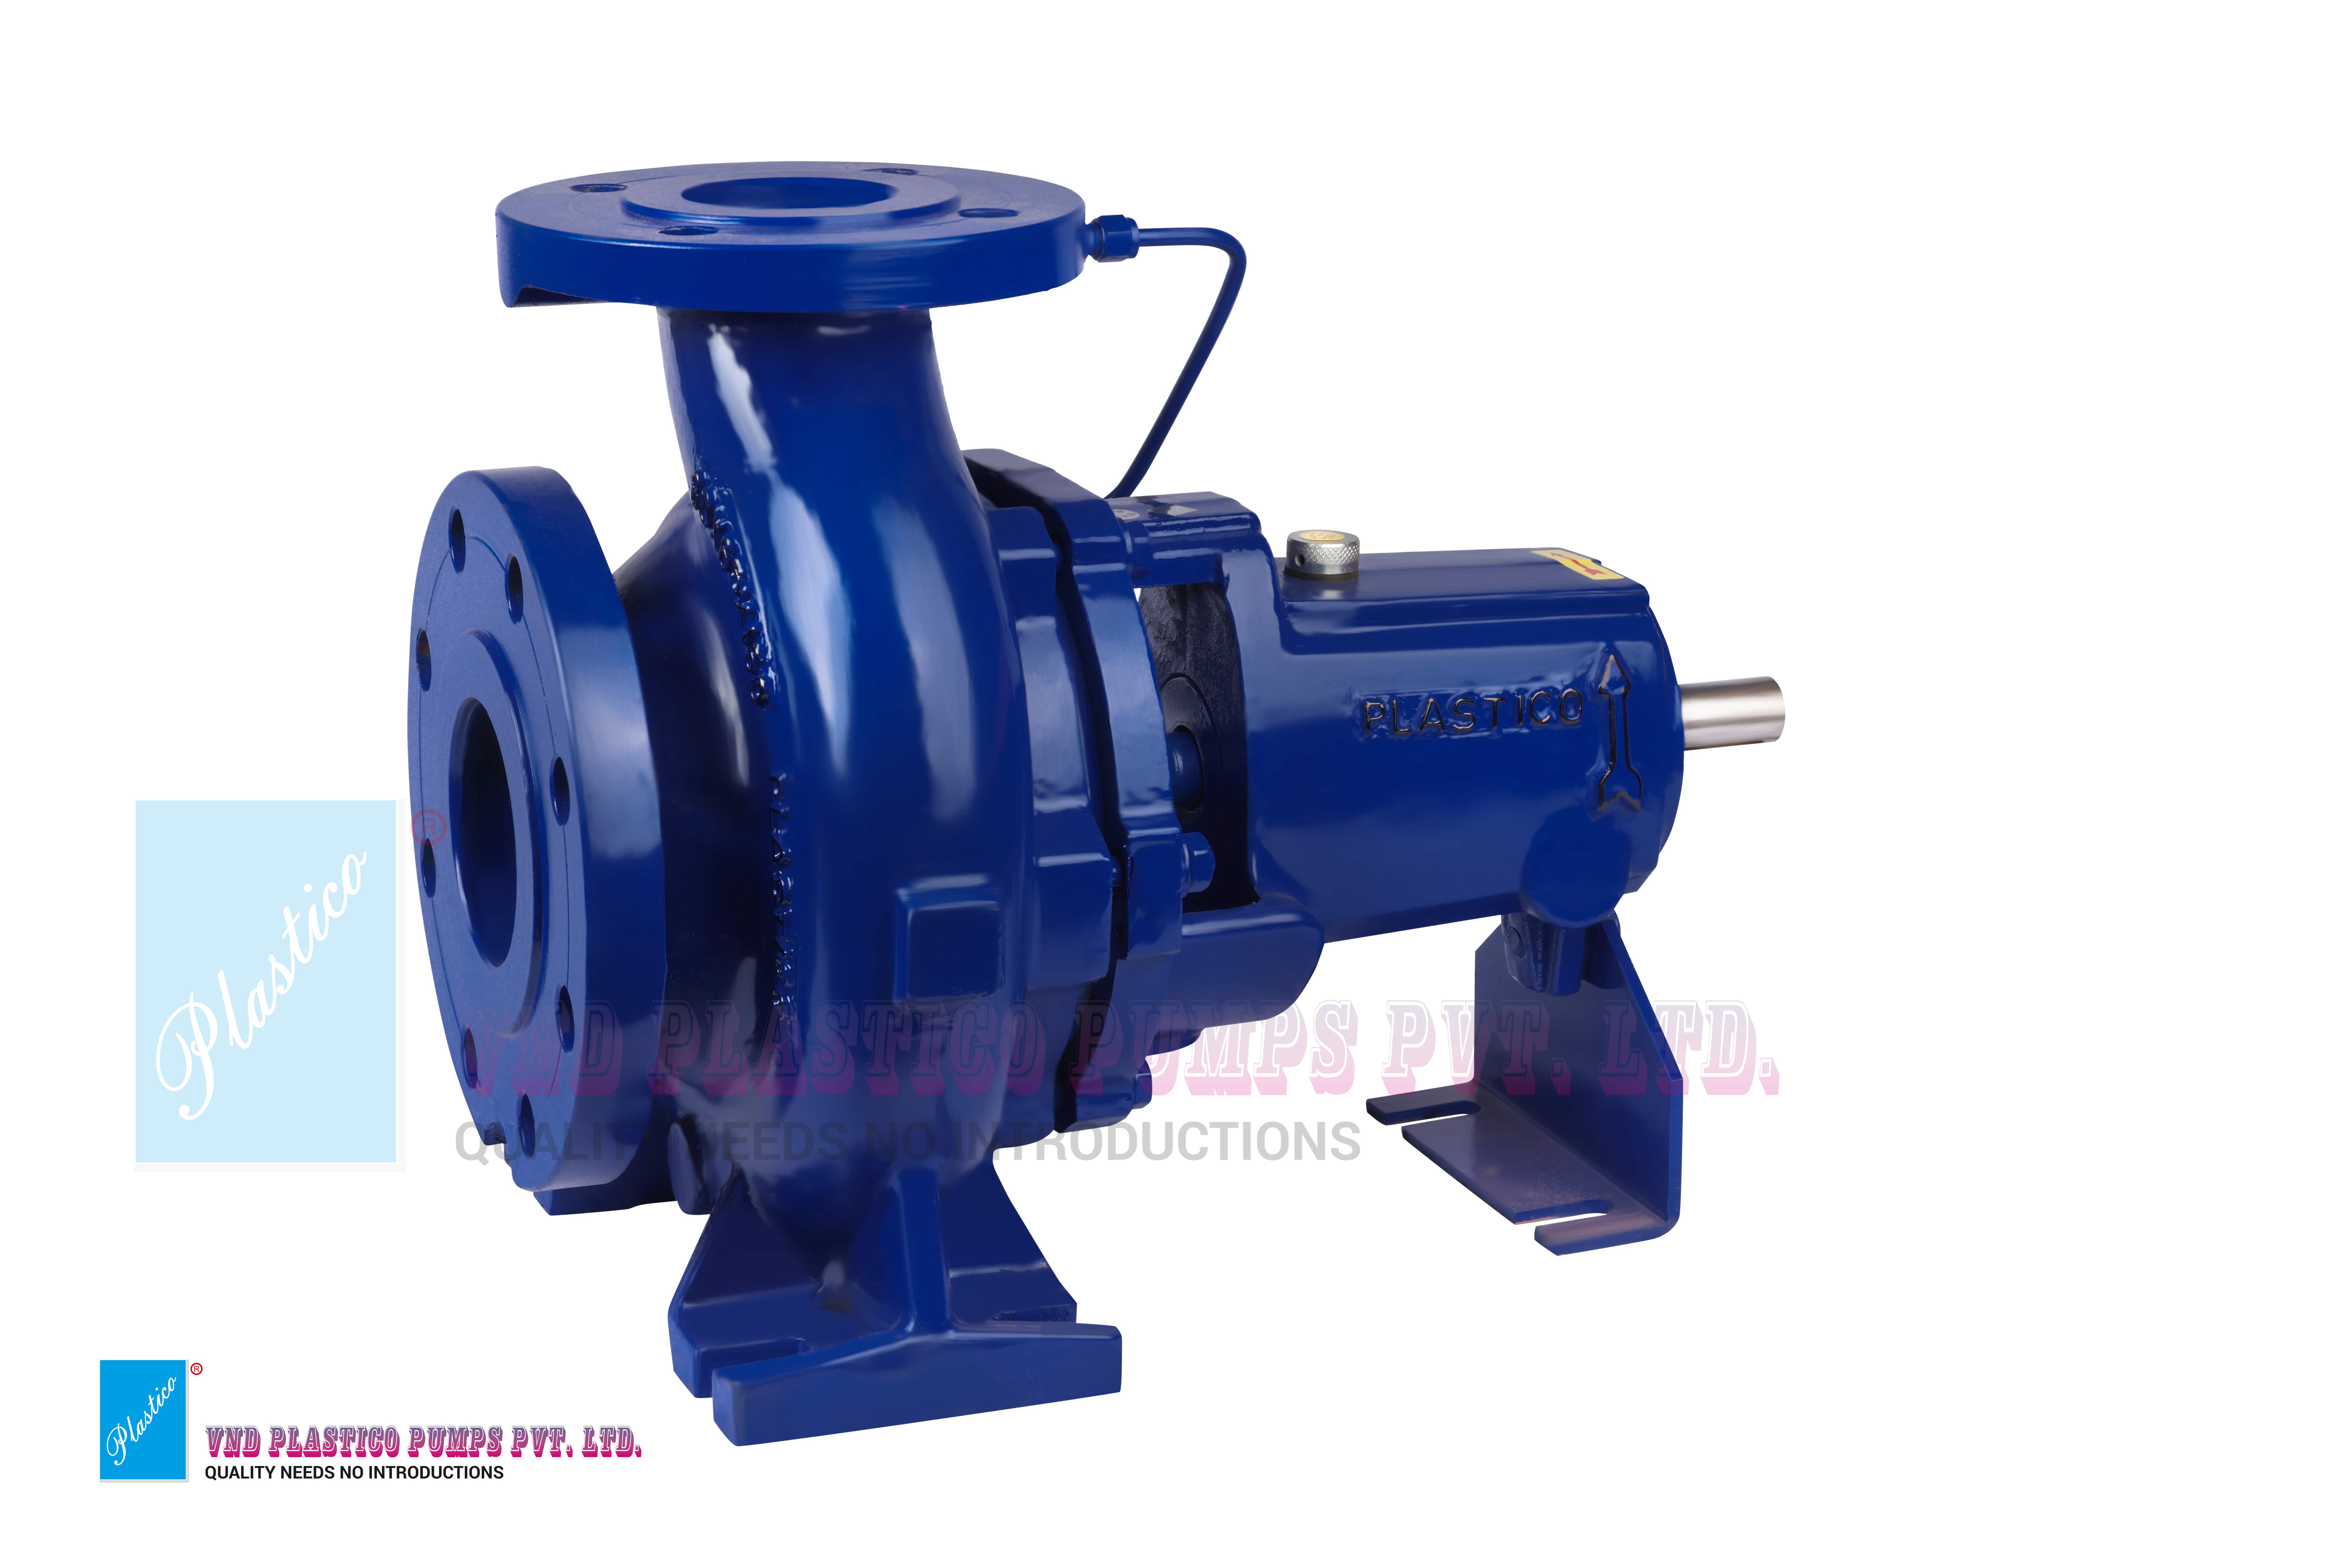 A Guide To Choosing And Using Centrifugal Pumps